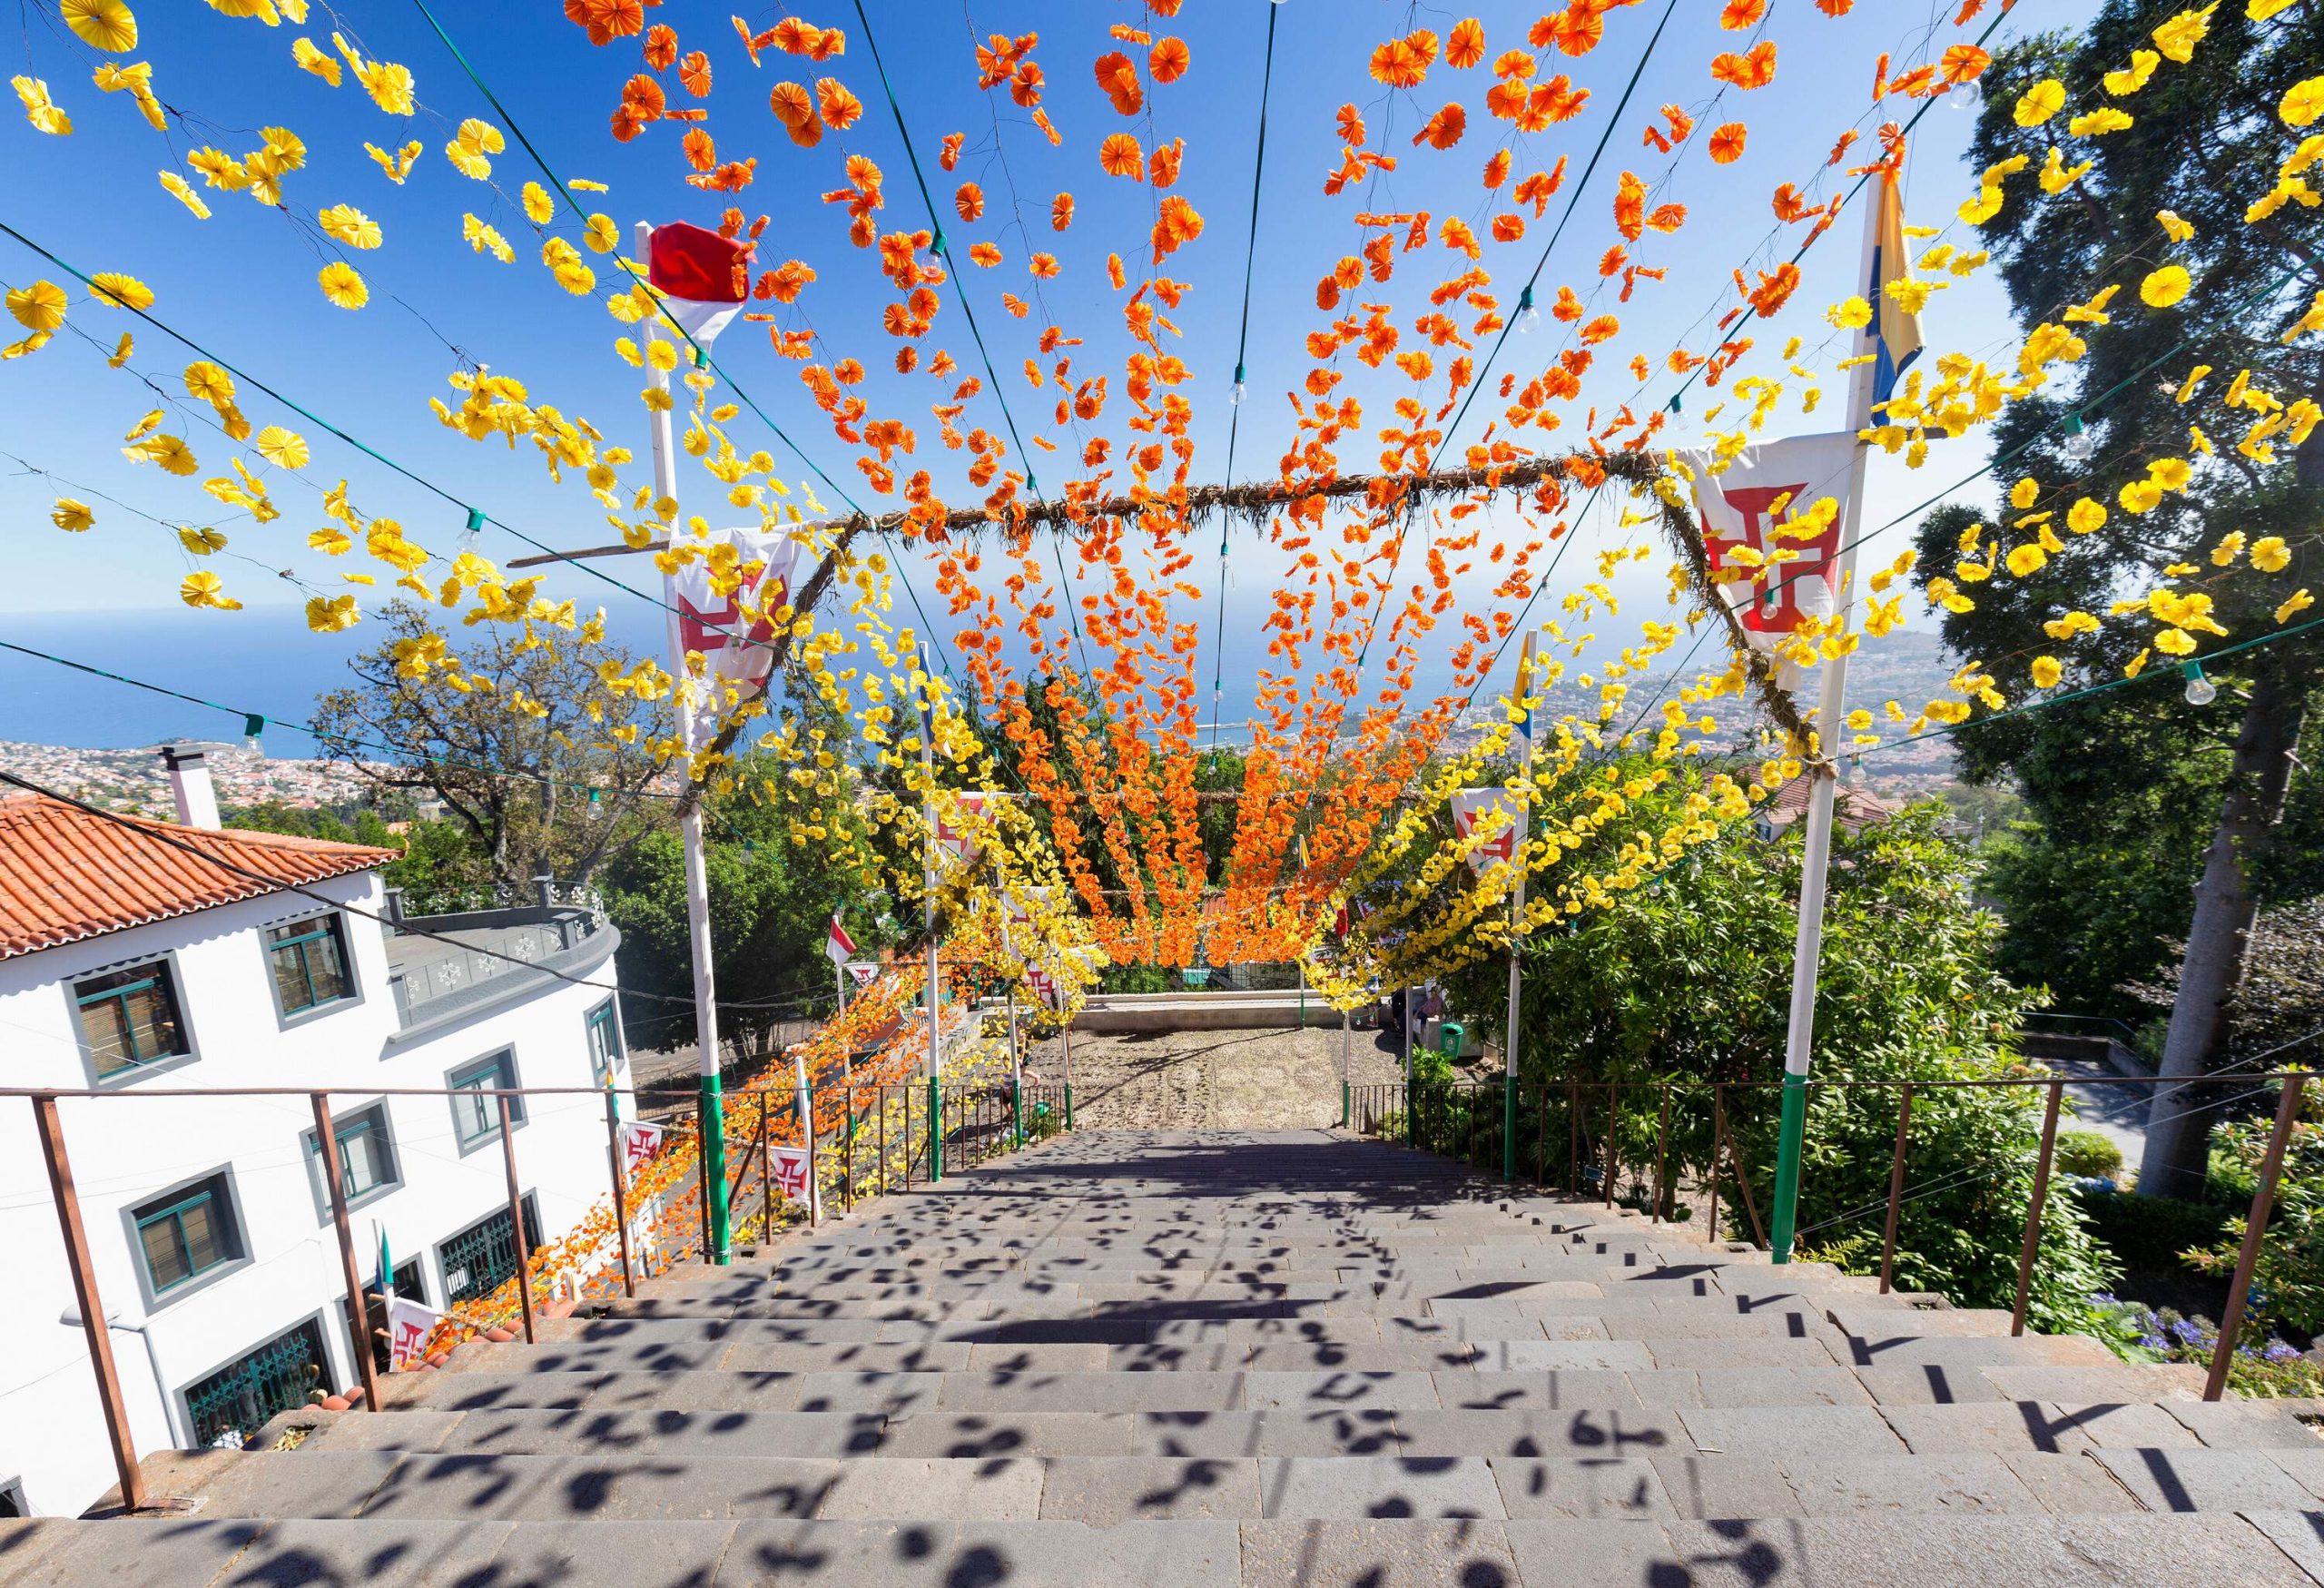 A descending stairway decorated with hanging yellow and orange paper flowers on a sunny day.